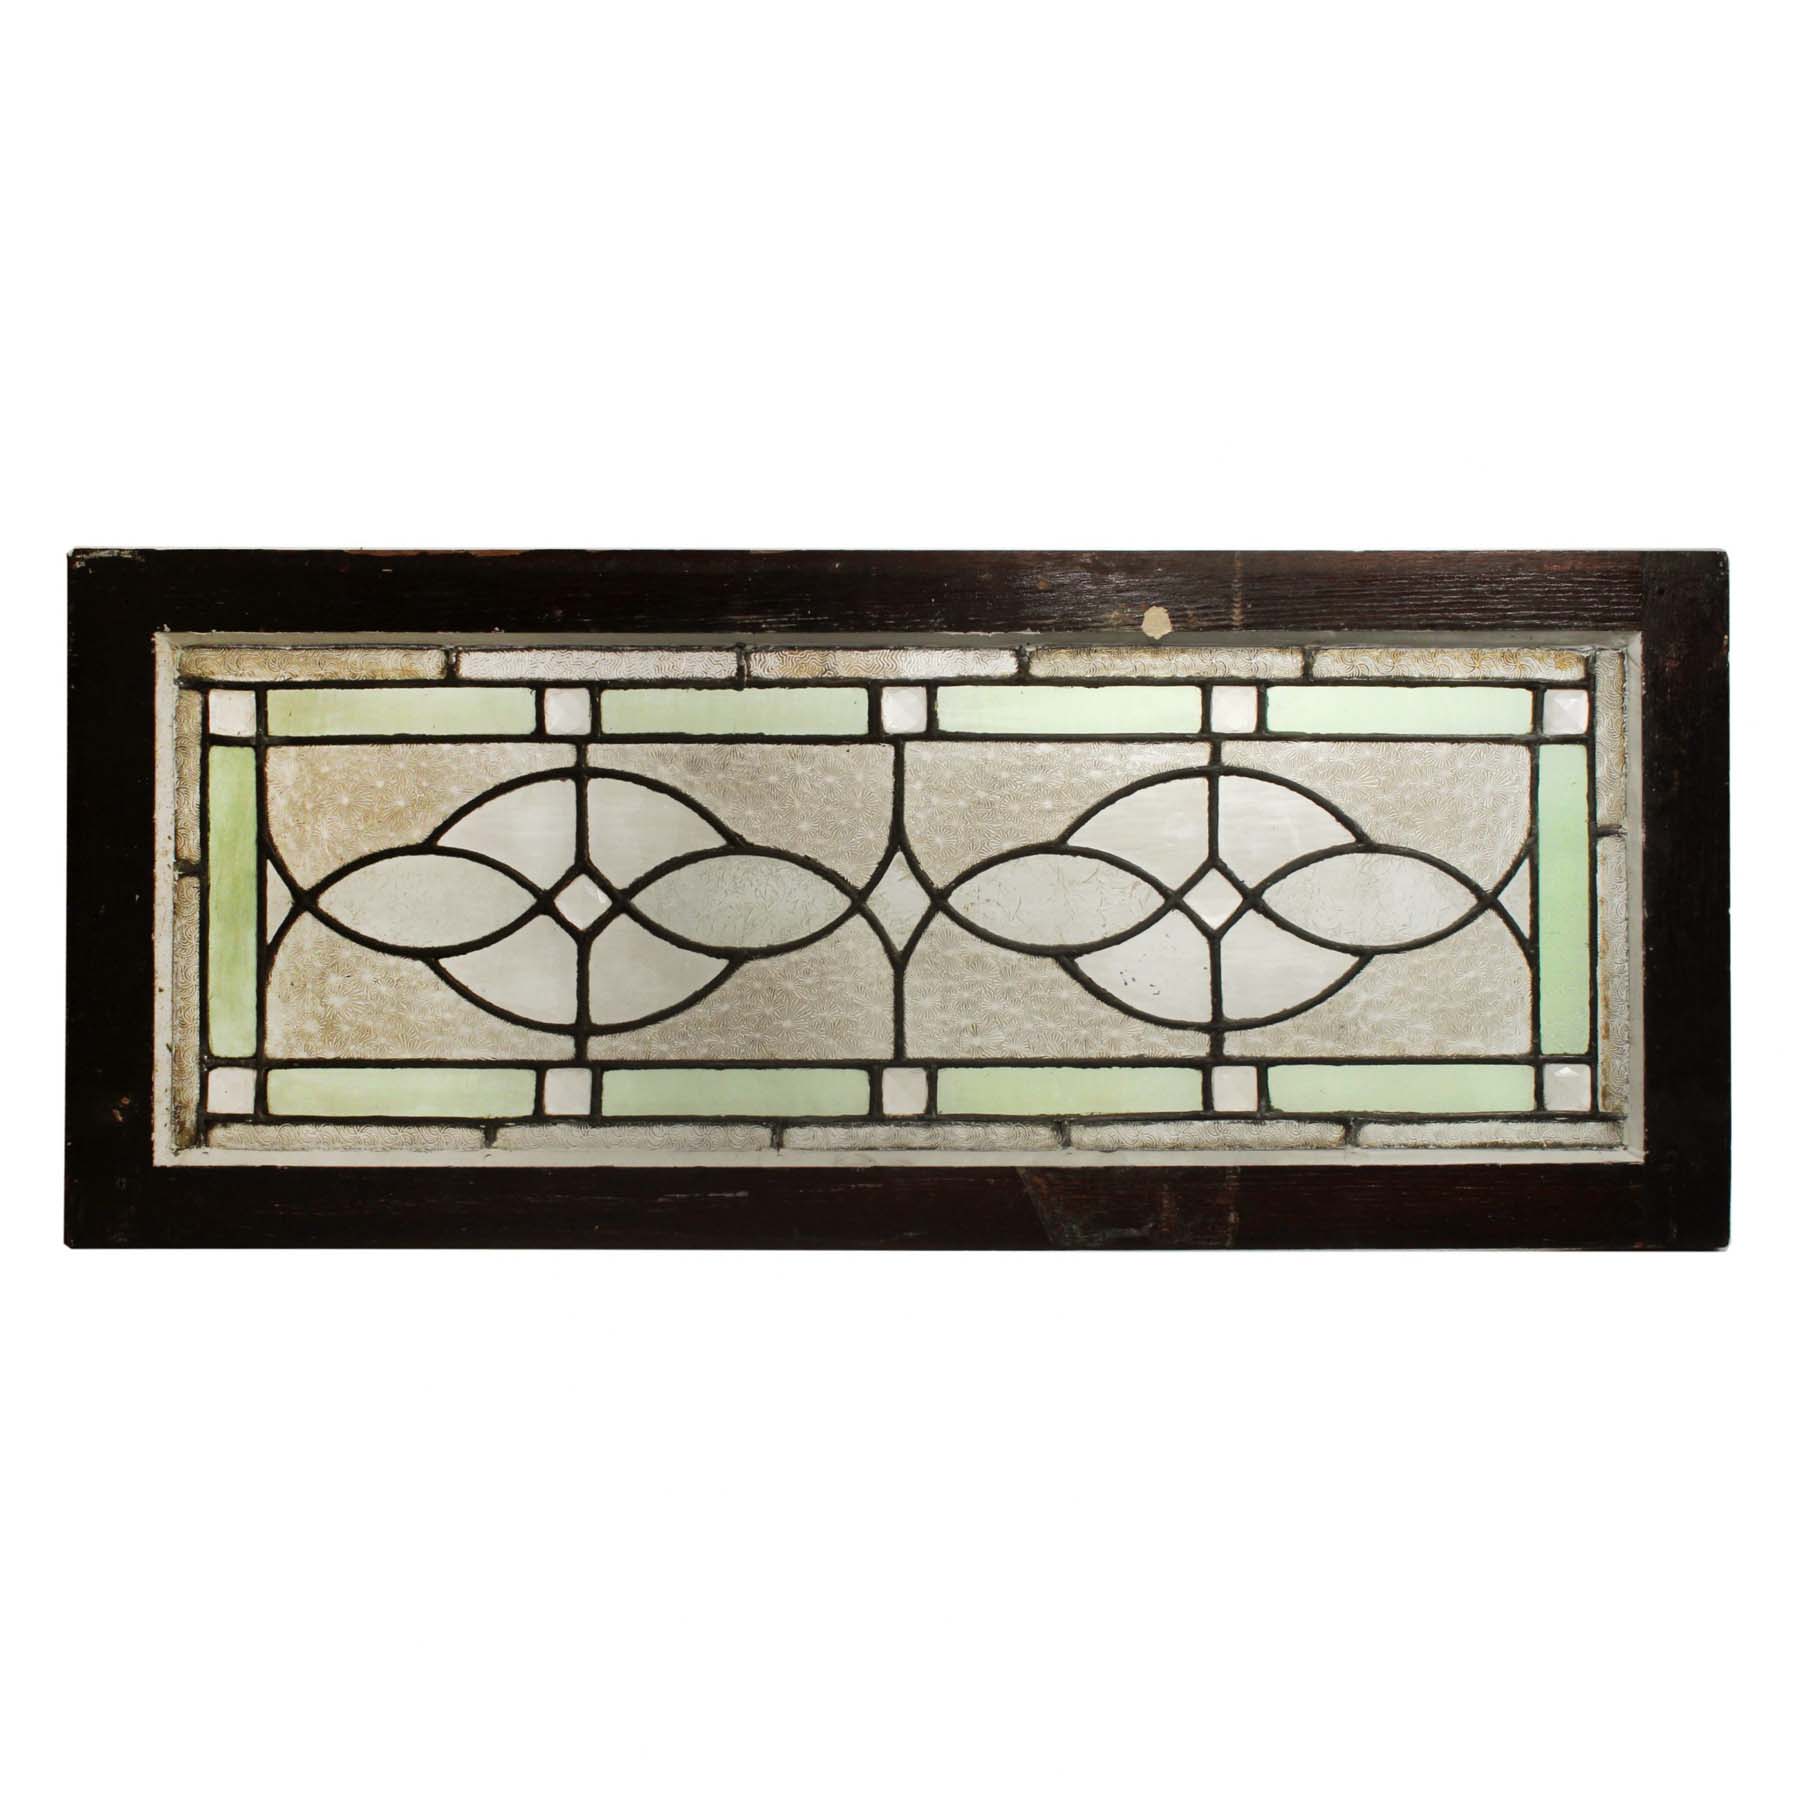 SOLD Antique American Leaded Glass Window with Jewels-66913